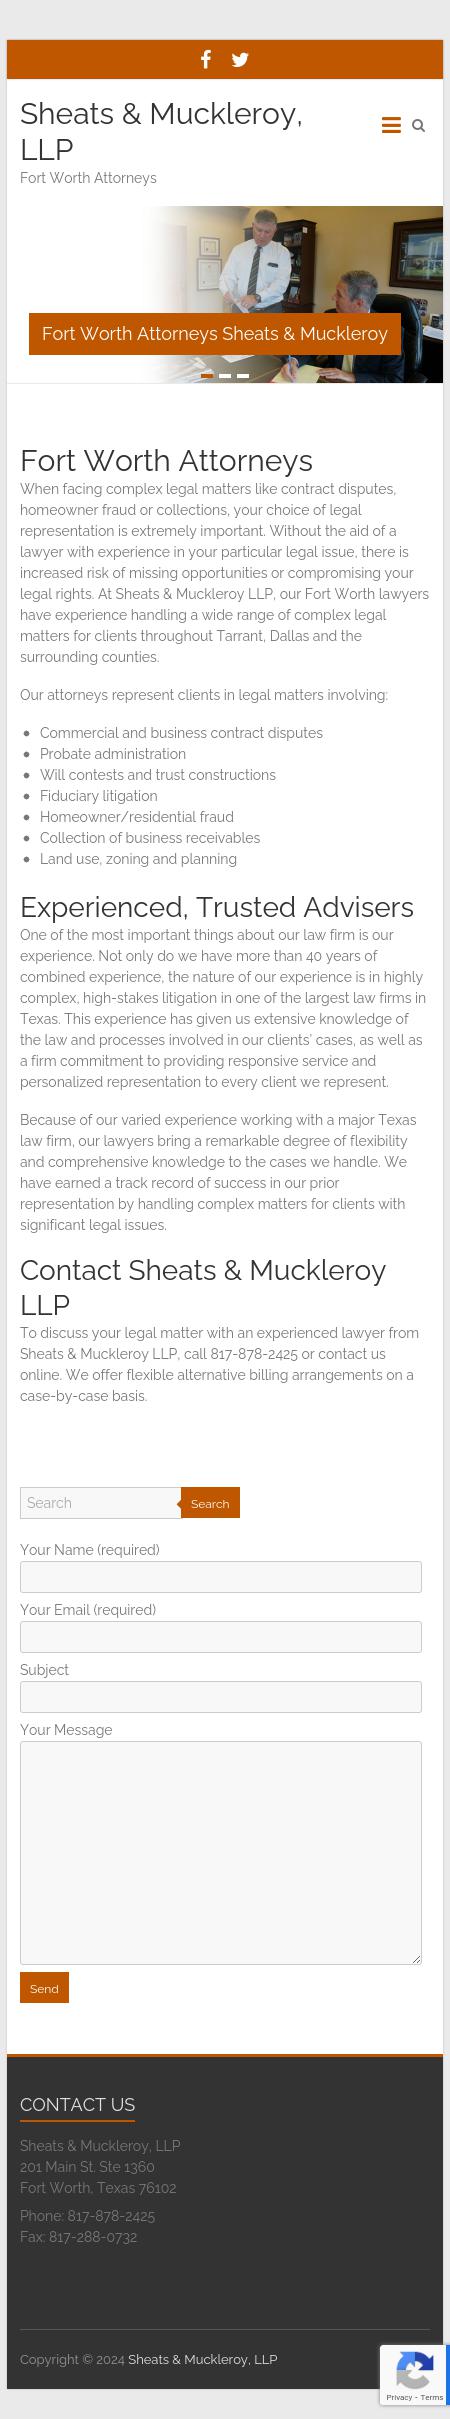 Sheats & Muckleroy LLP - Fort Worth TX Lawyers